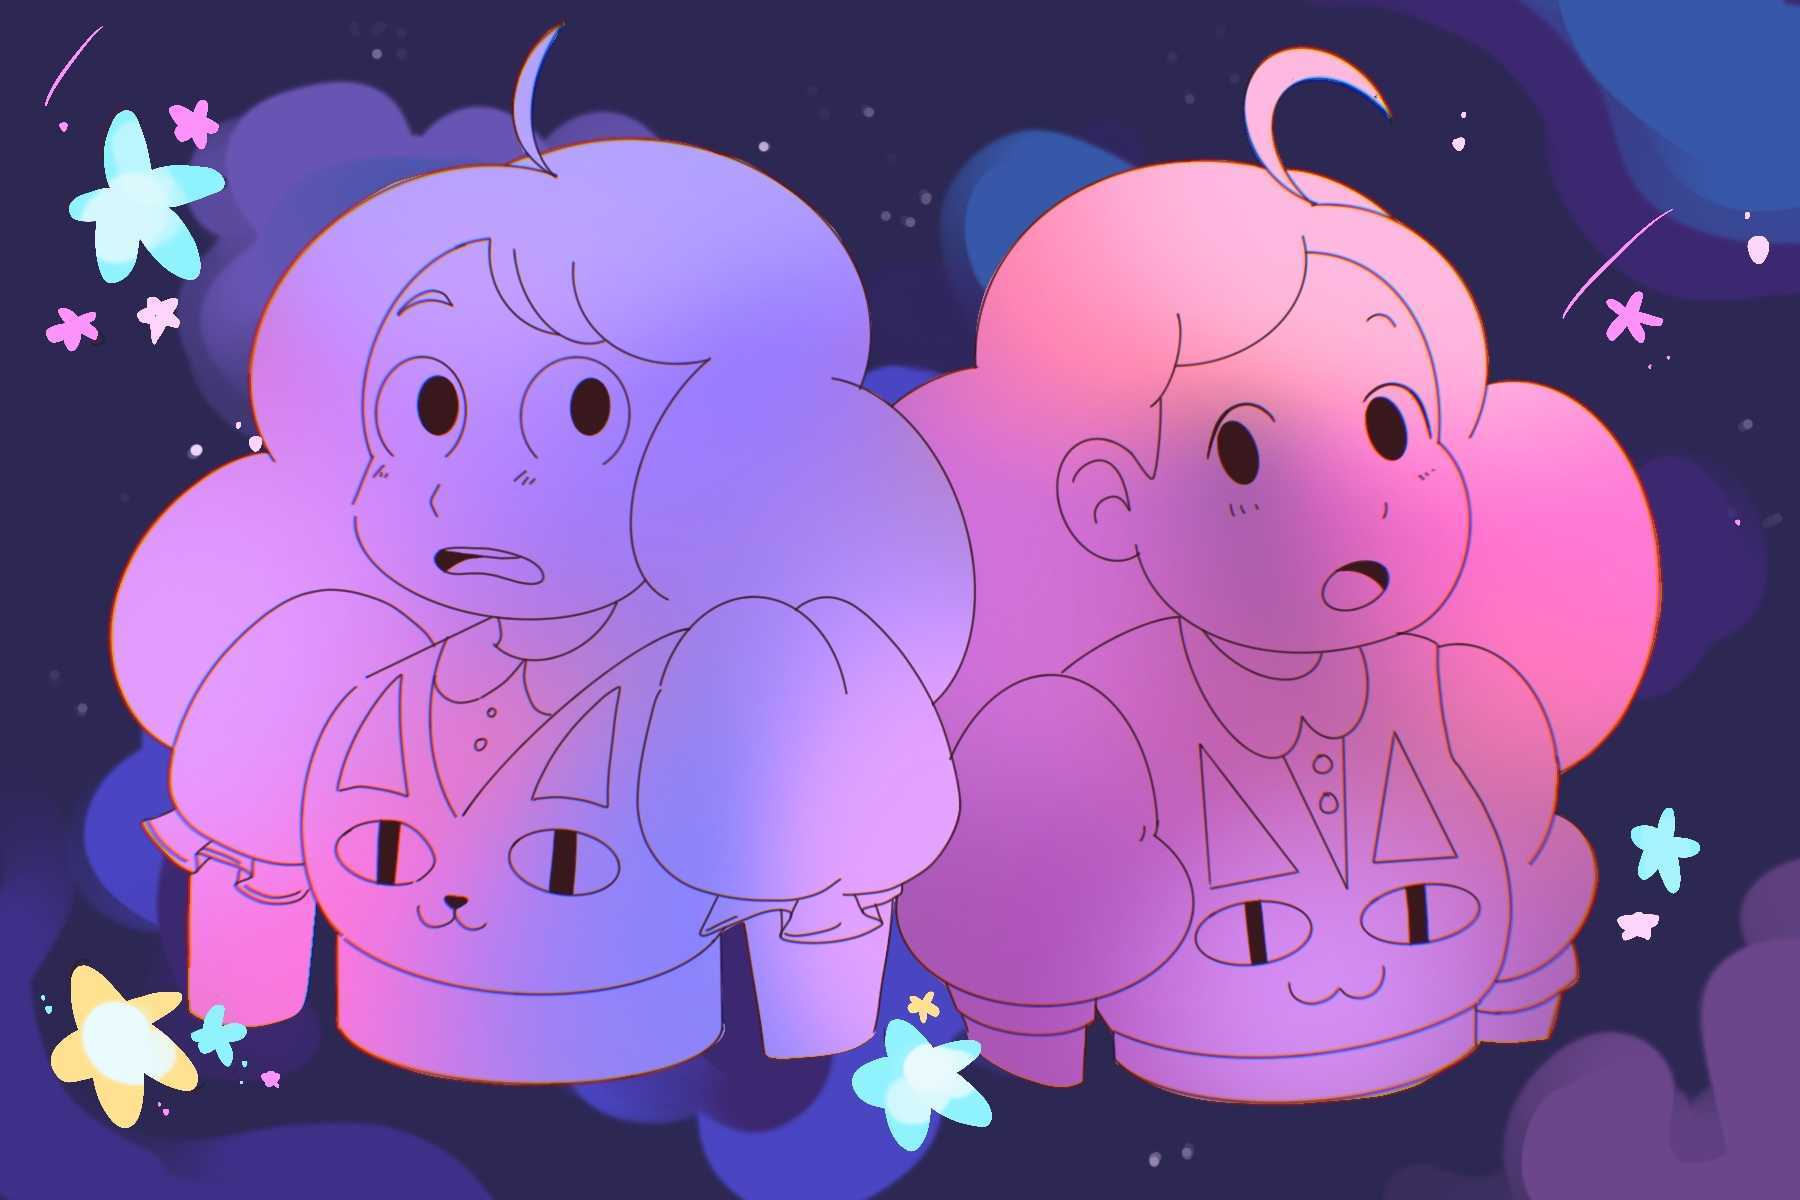 A drawing of Bee and PuppyCat shows two characters staring with fear